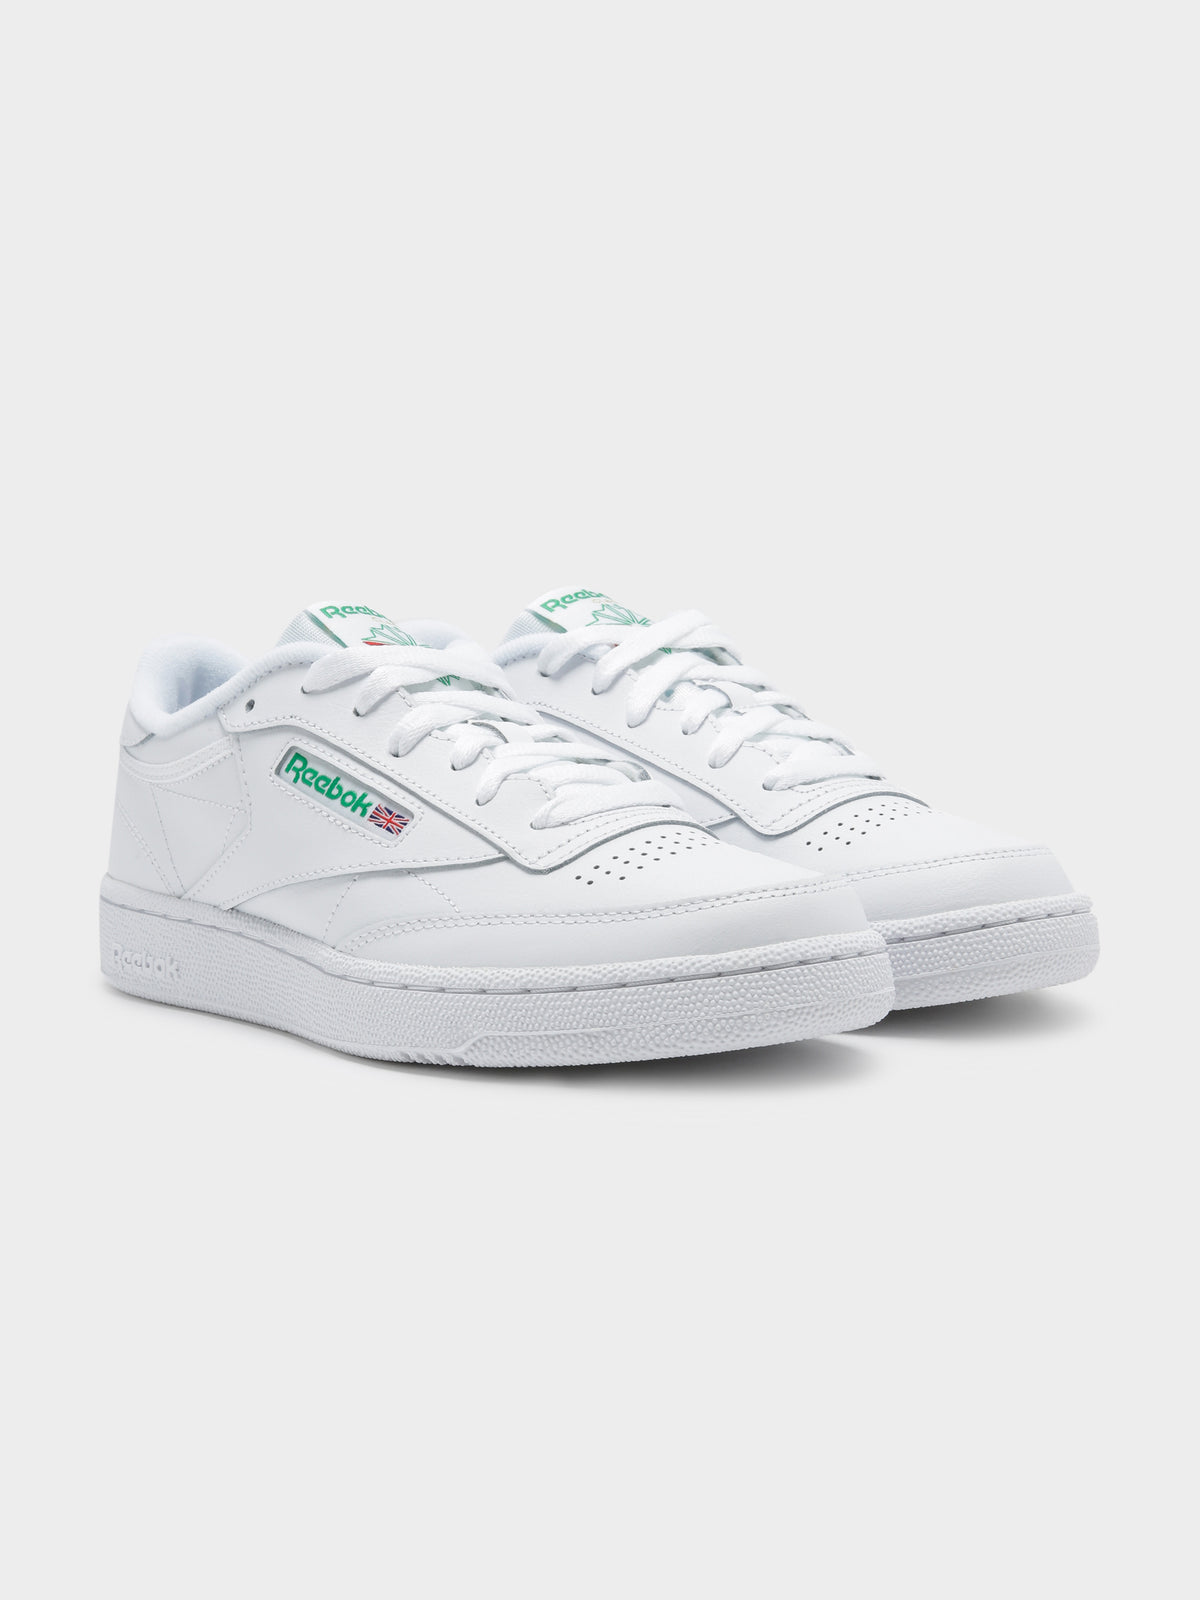 Unisex Club C 85 Sneakers in White &amp; Green